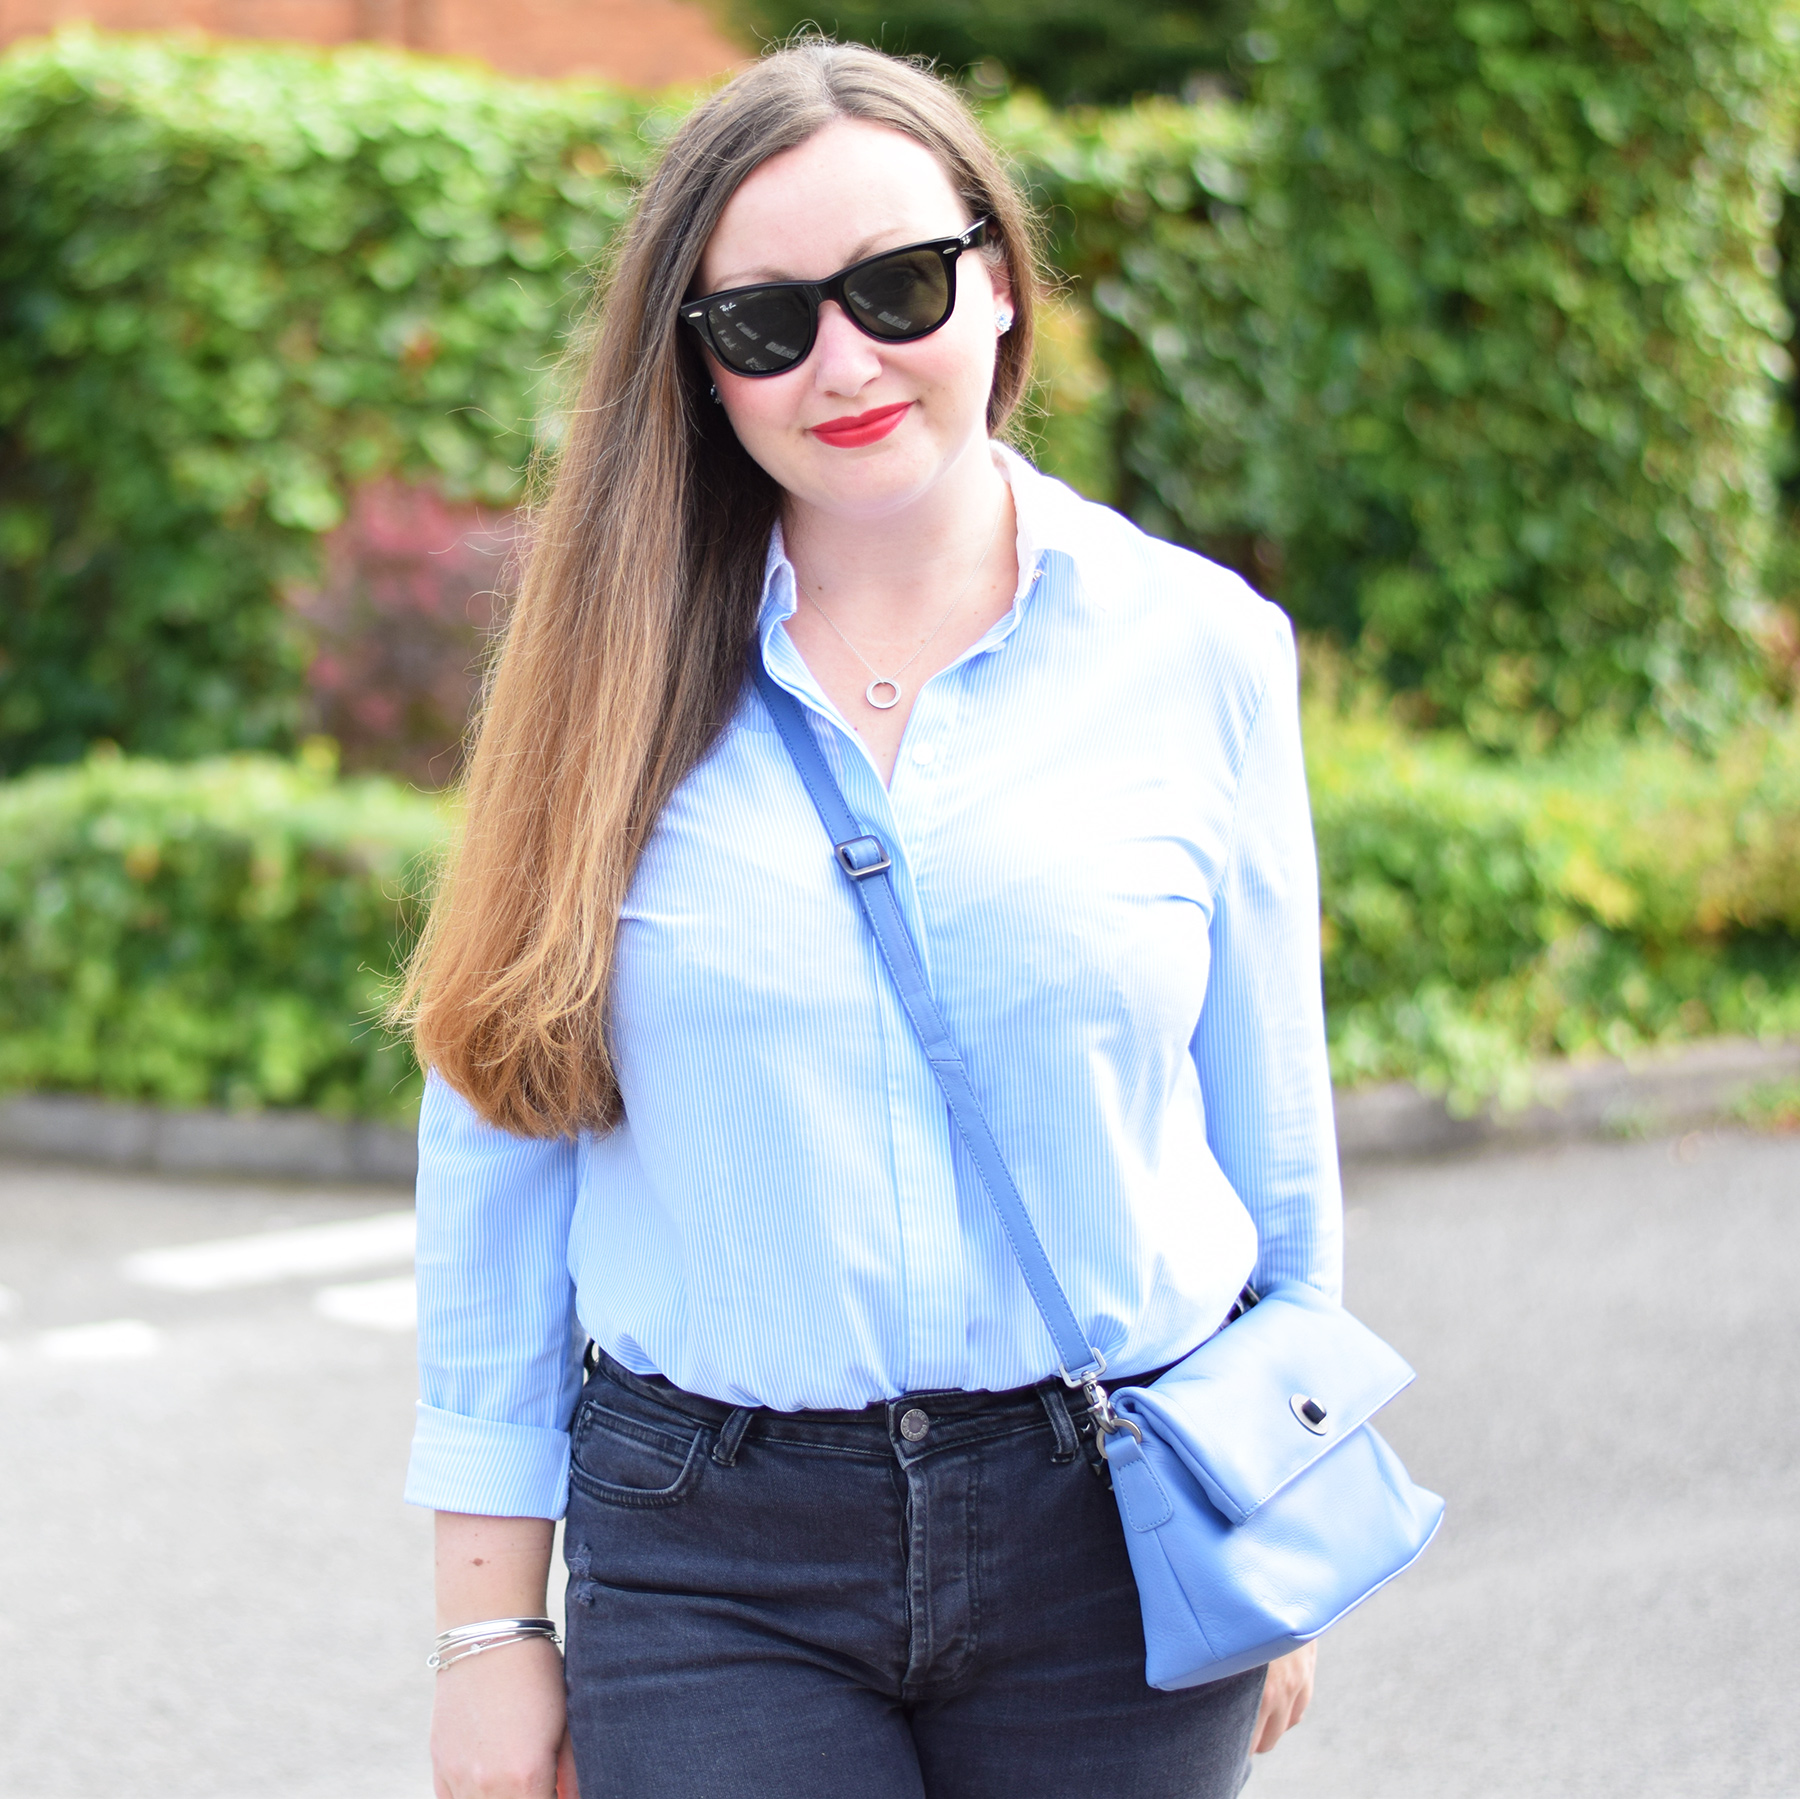 Jacquard Flower Blogger wearing blue striped shirt and black jeans with blue cross body bag